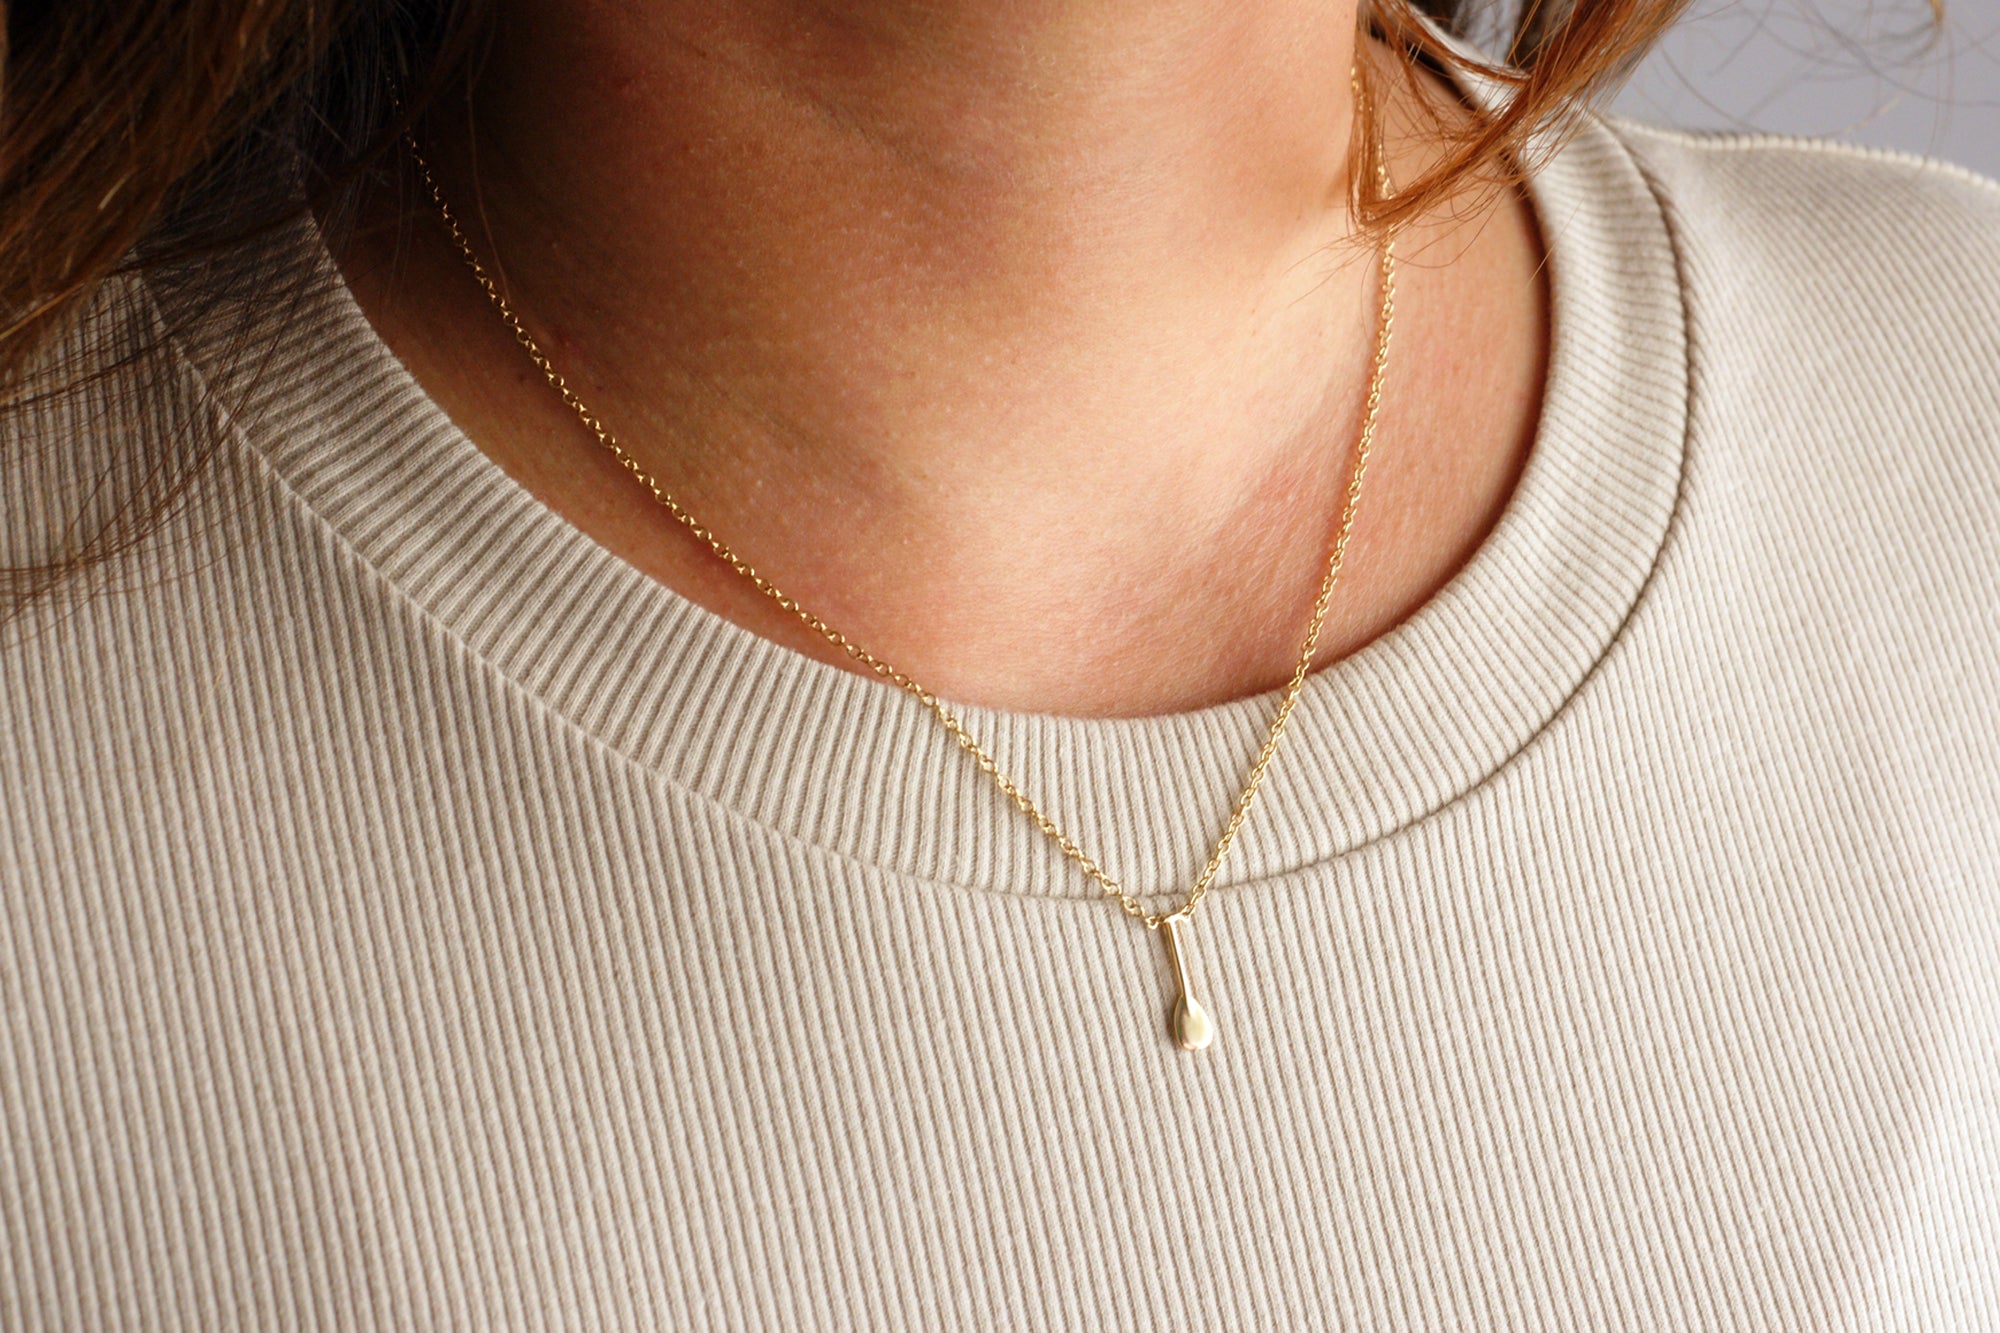 The Outrigger Paddle Necklace (Tiny)